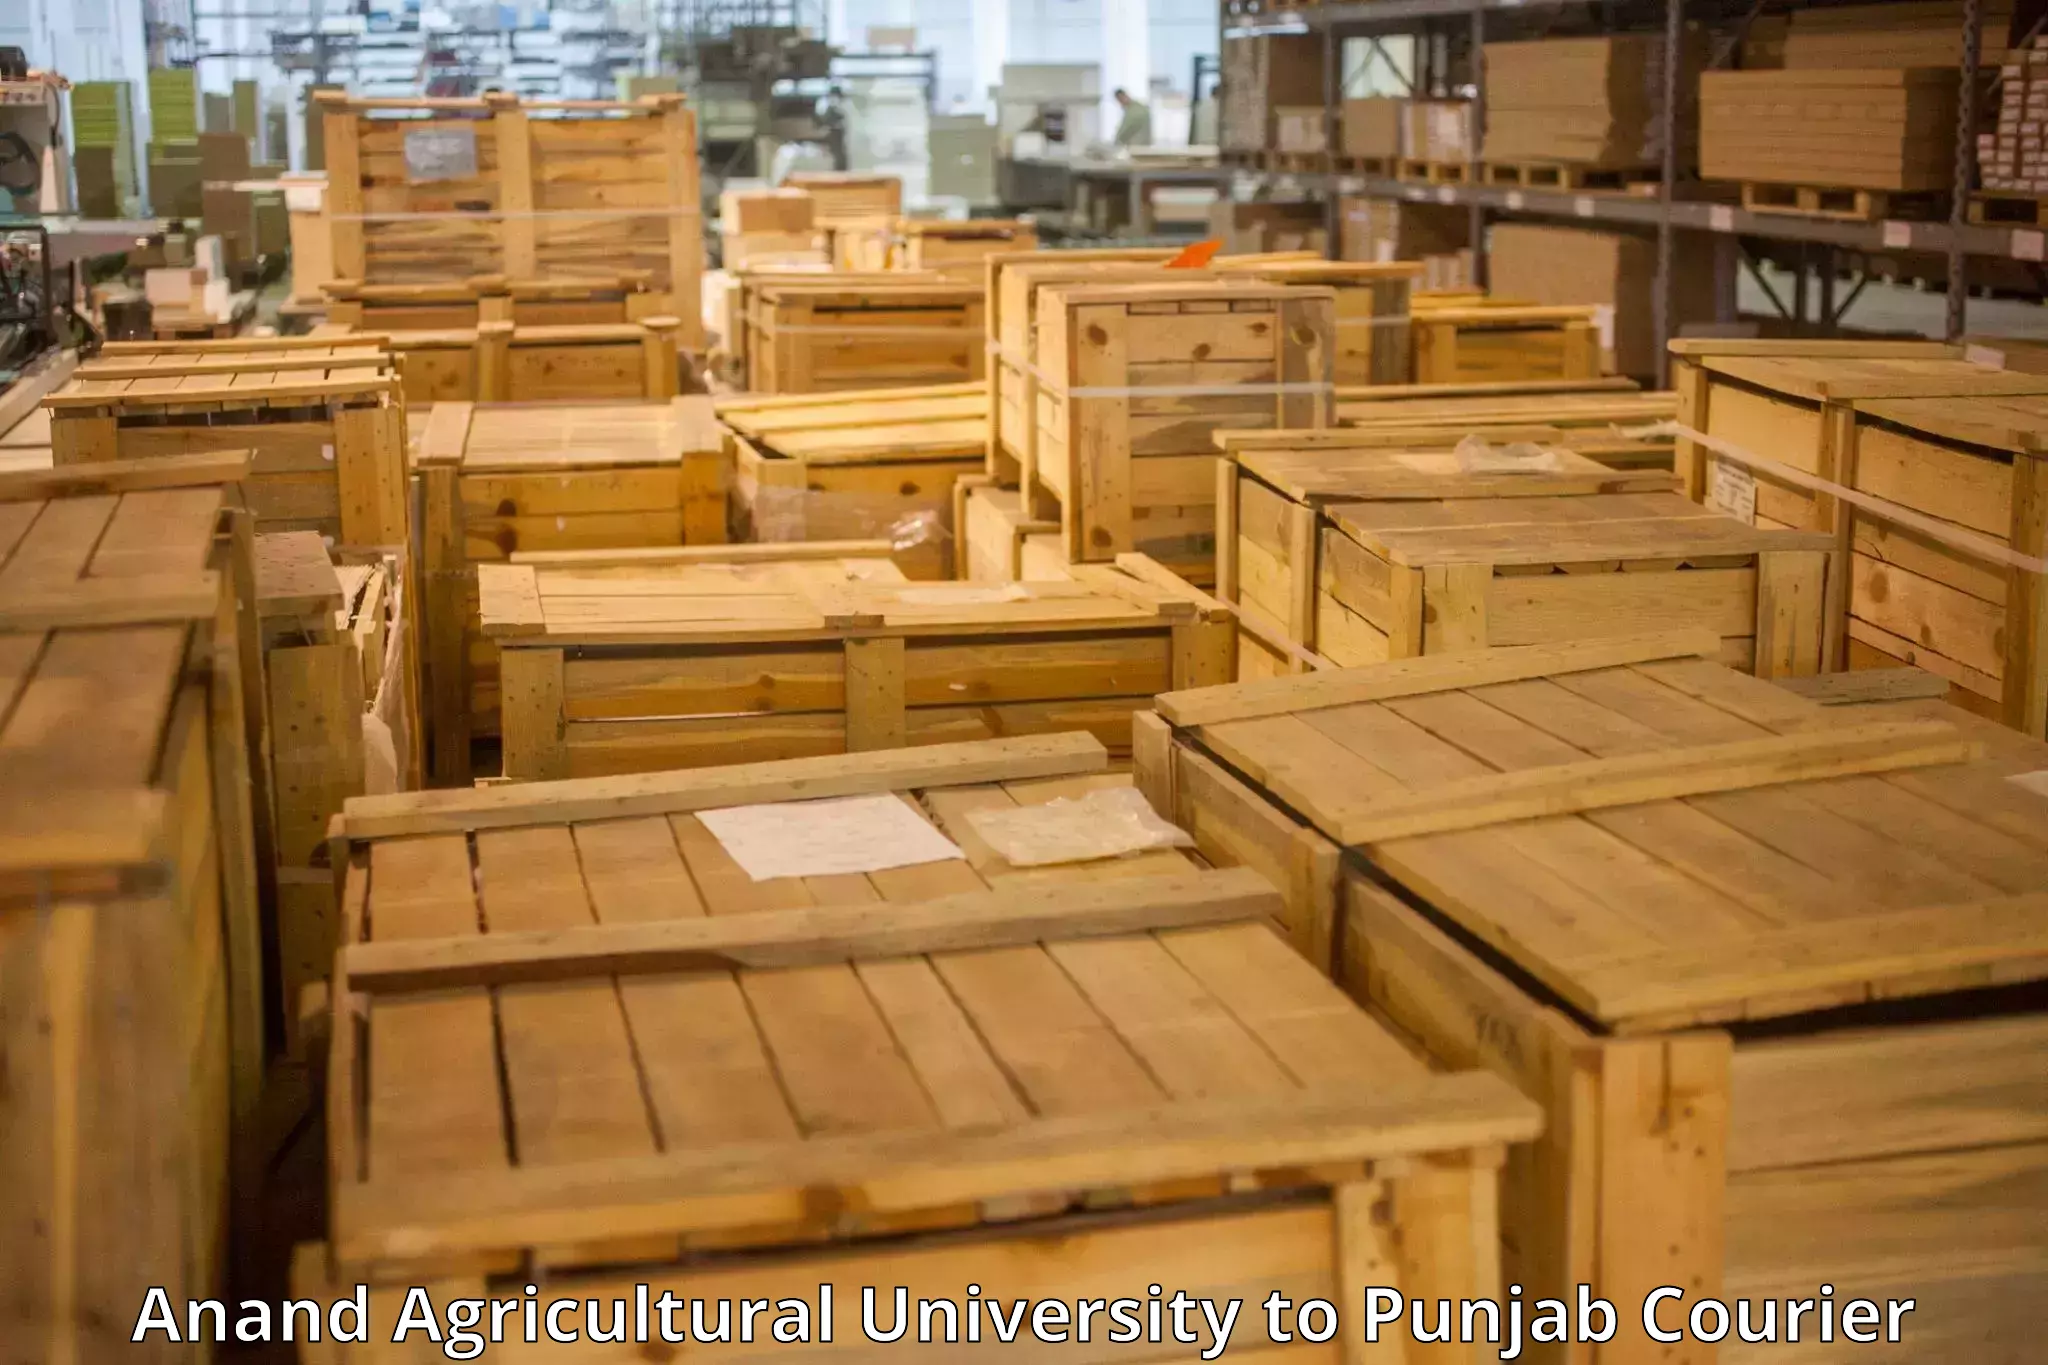 Baggage relocation service Anand Agricultural University to Mandi Gobindgarh